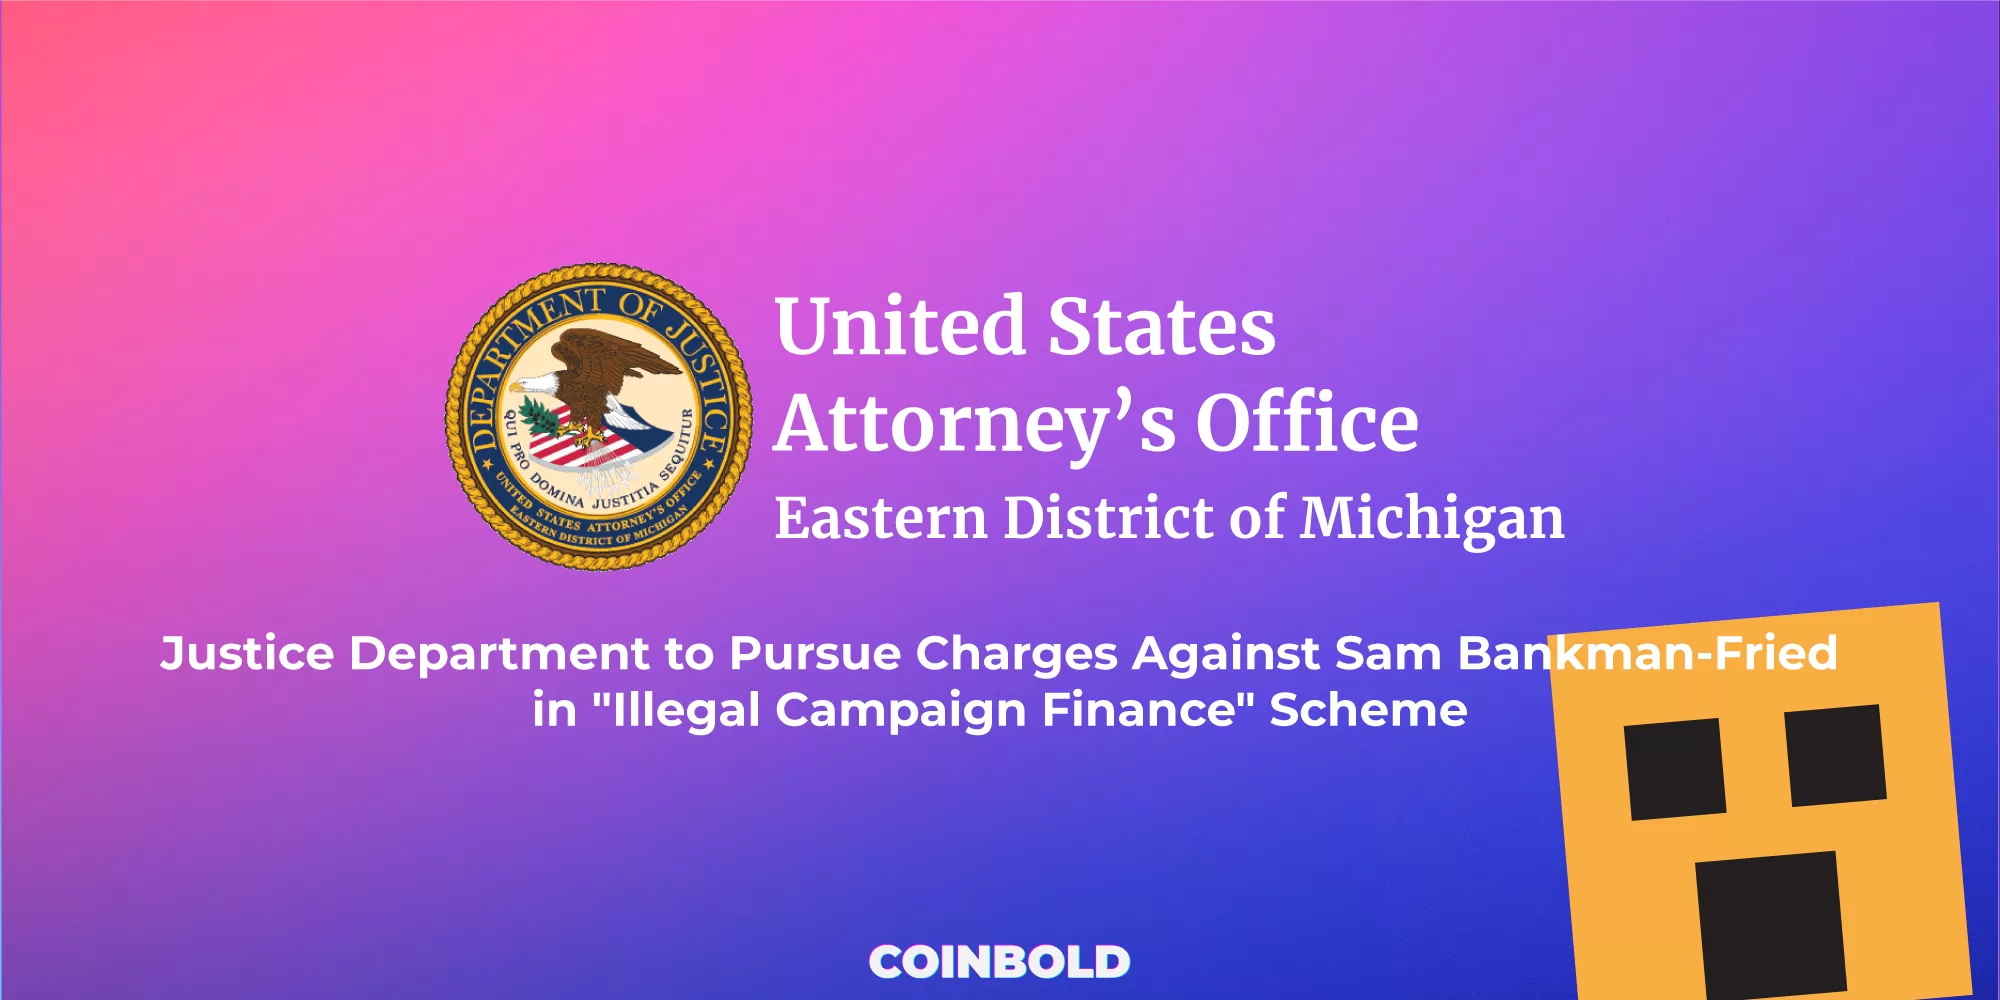 Justice Department to Pursue Charges Against Sam Bankman Fried in Illegal Campaign Finance Scheme